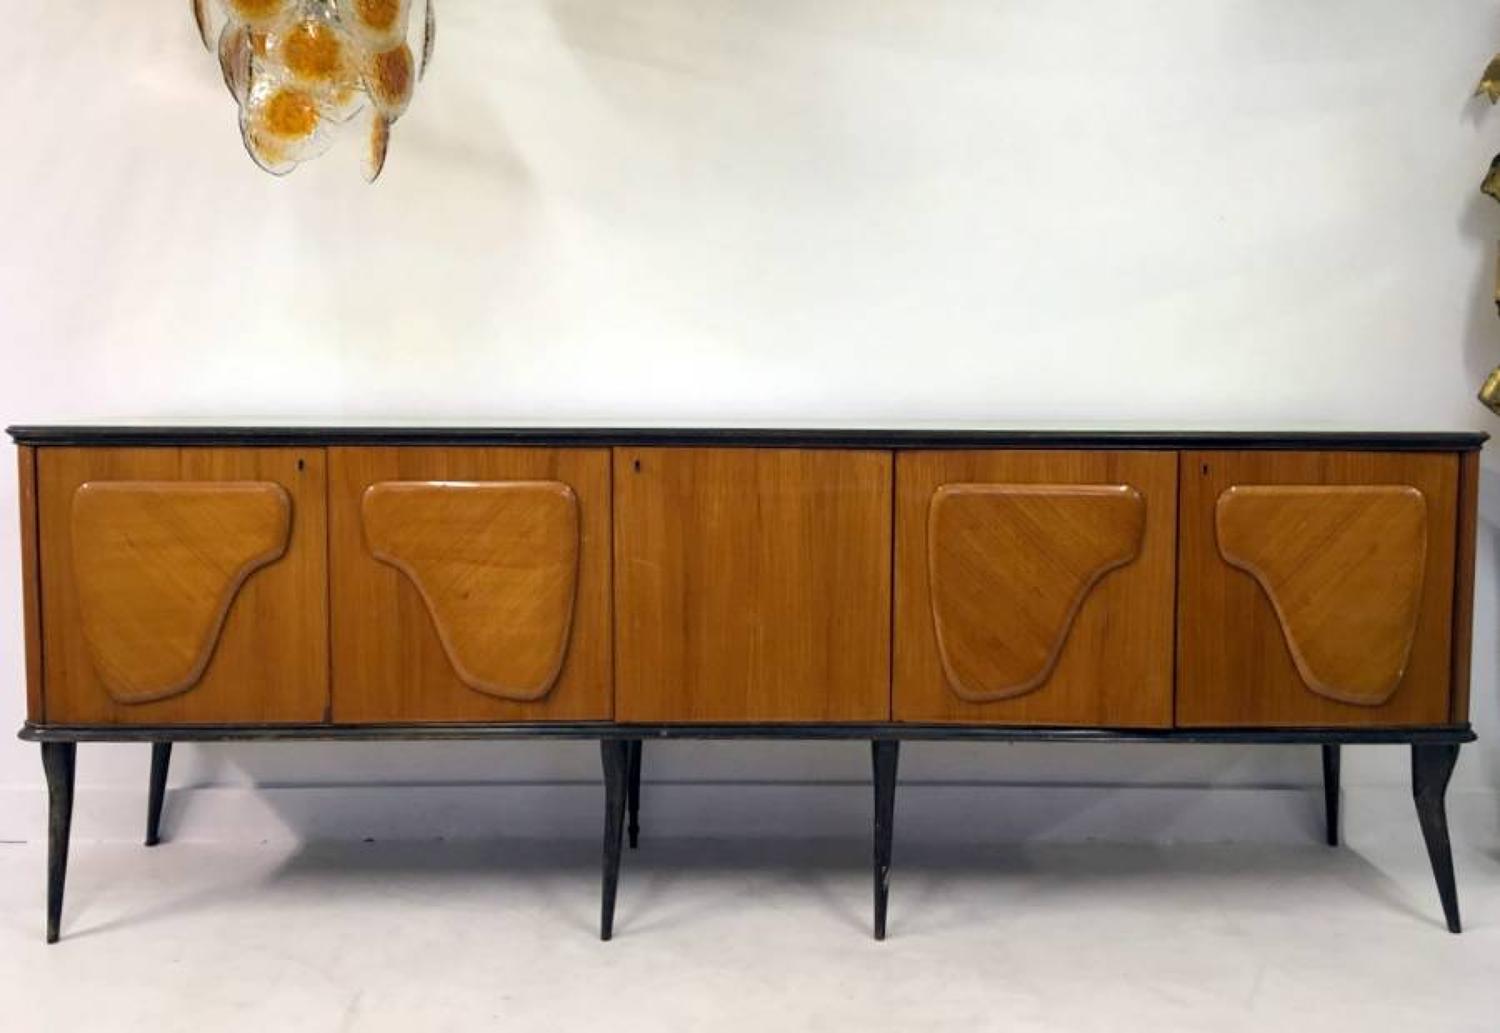 1950s Italian sideboard with glass top